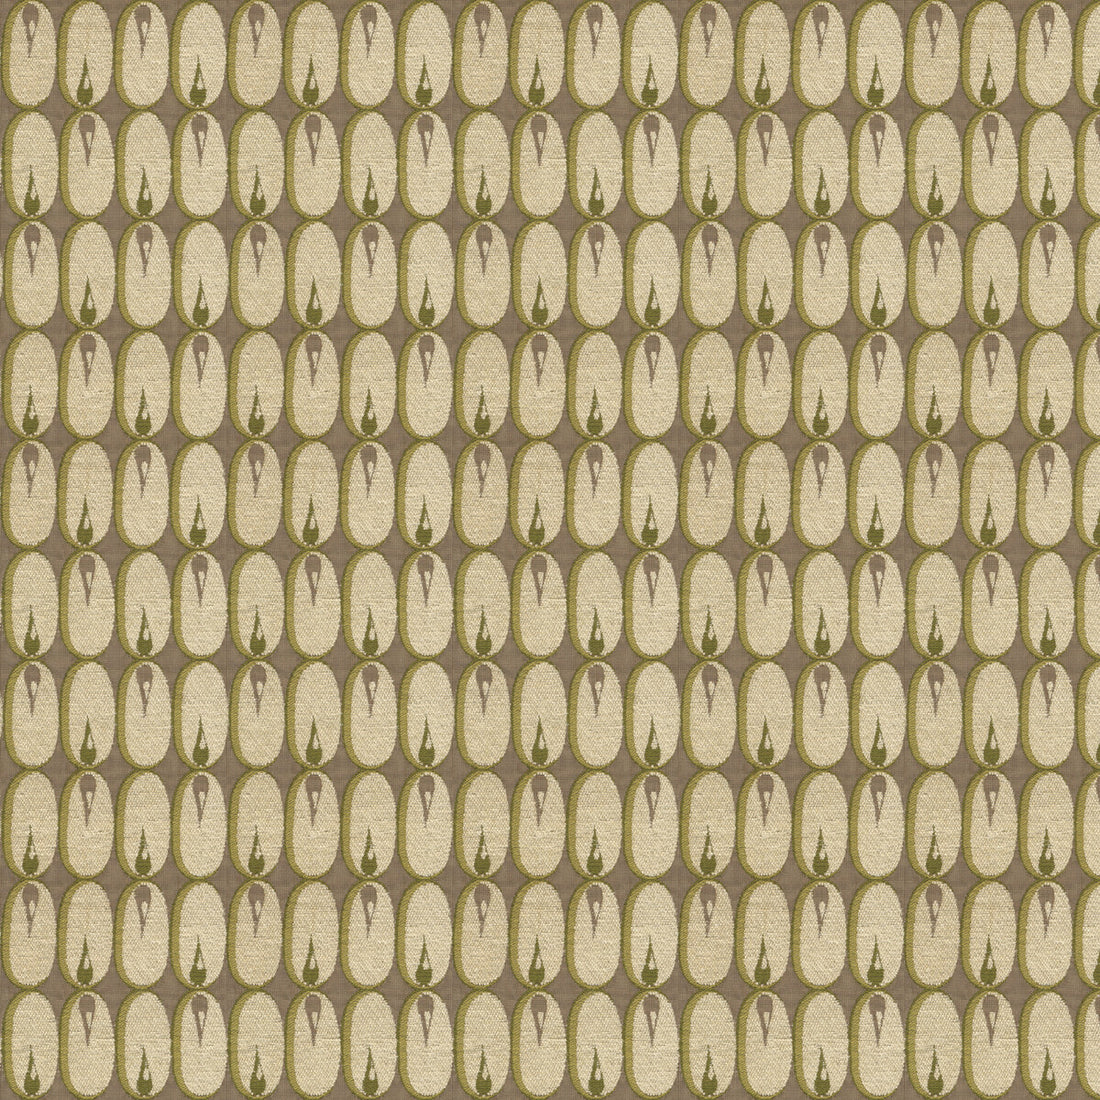 Oval Flame fabric in lime color - pattern GWF-2924.23.0 - by Lee Jofa Modern in the Allegra Hicks II collection